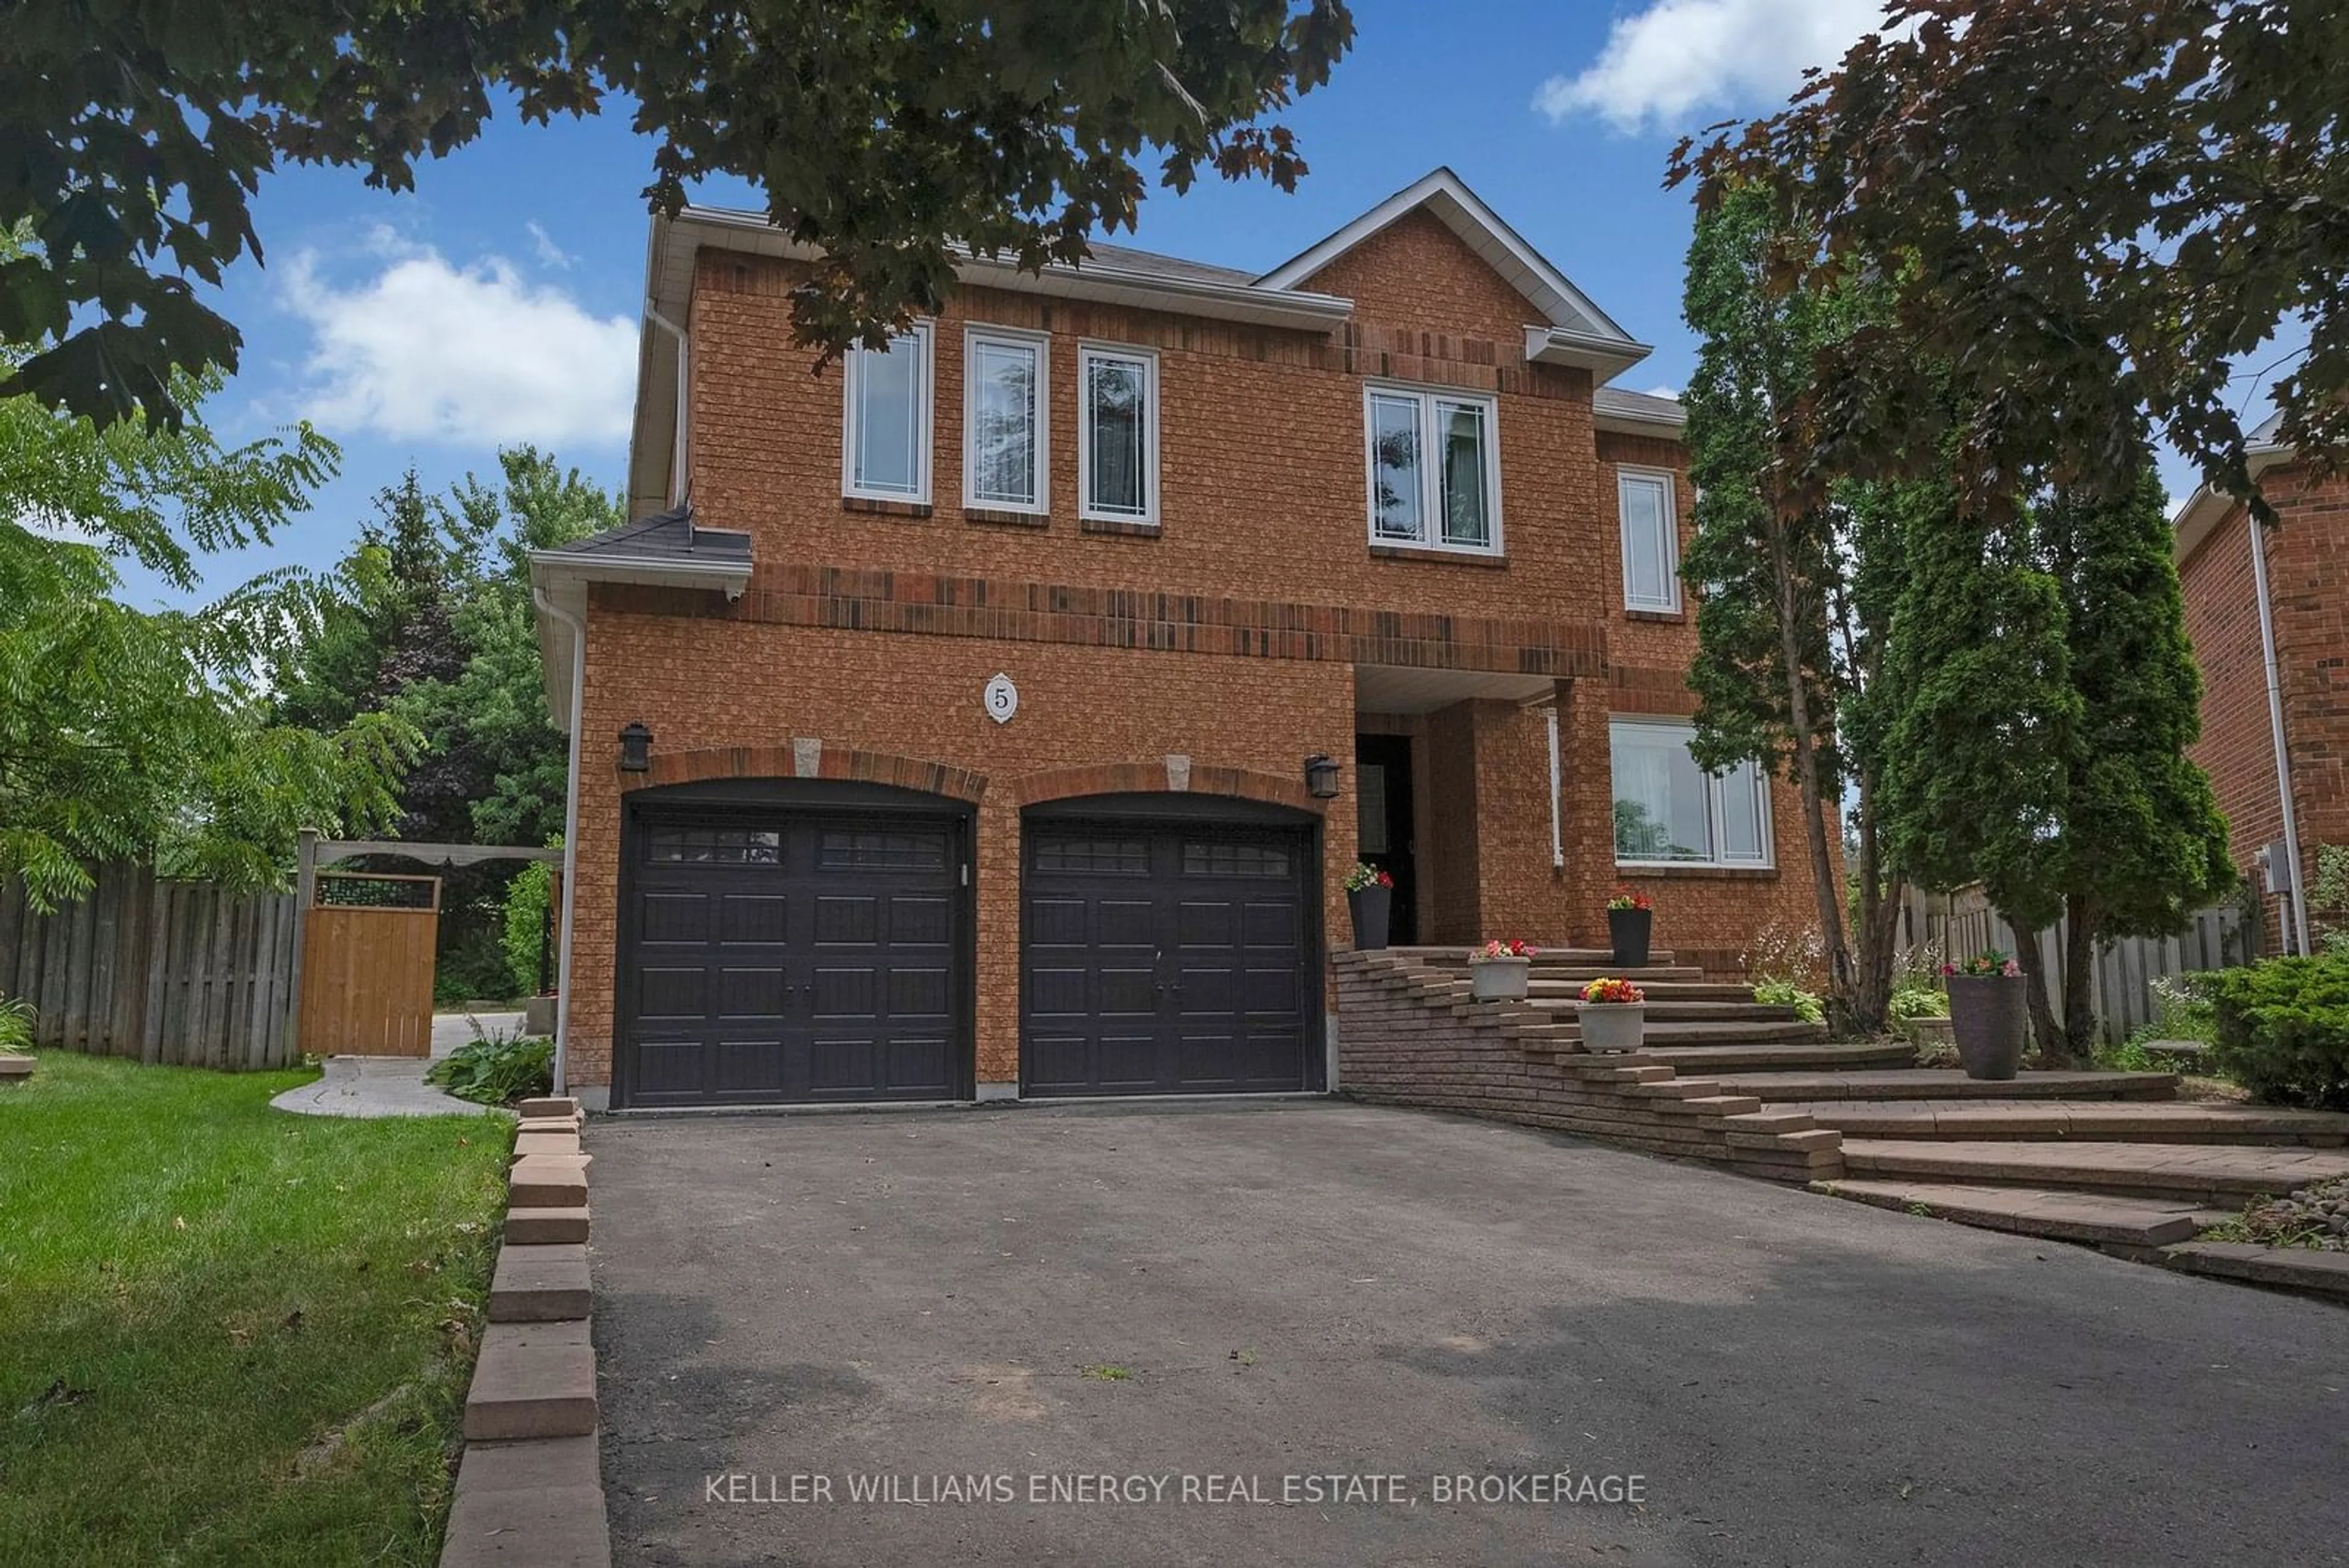 Home with brick exterior material for 5 Nurse Crt, Whitby Ontario L1R 2H8